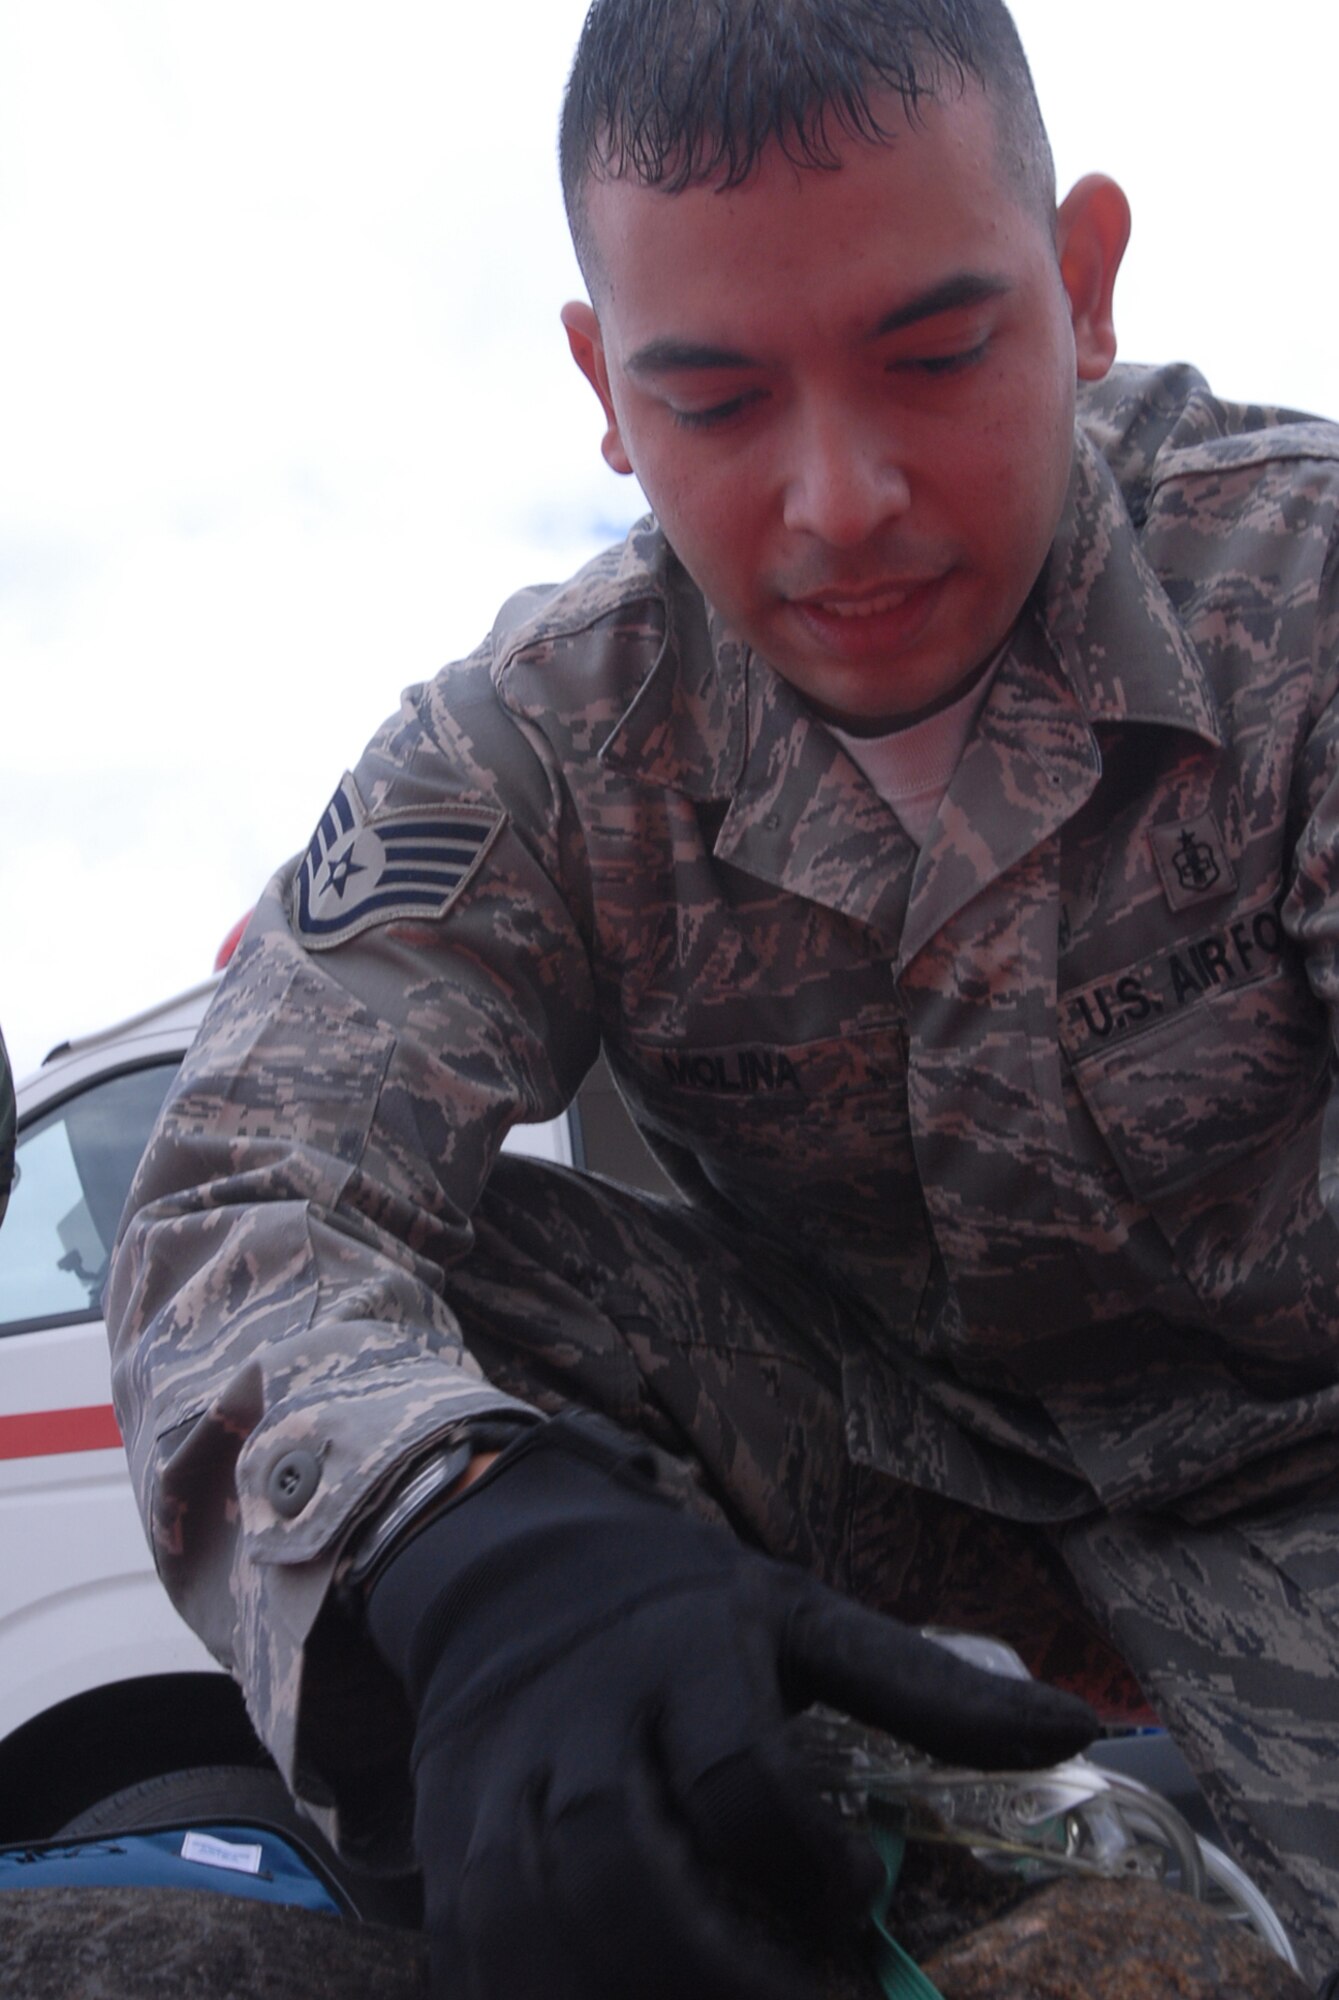 Staff Sgt. Manuel Molina, 18th Medical Operations Squadron, places an oxygen mask over a burned casualty during a Local Operational Readiness Exercise Beverly High 08-02 scenario at Kadena Air Base, Japan, Dec. 4, 2007. This scenario tested the paramedic ability to respond to  personnel injured during a fire. (U.S. Air Force /Senior Airman Darnell T. Cannady) 